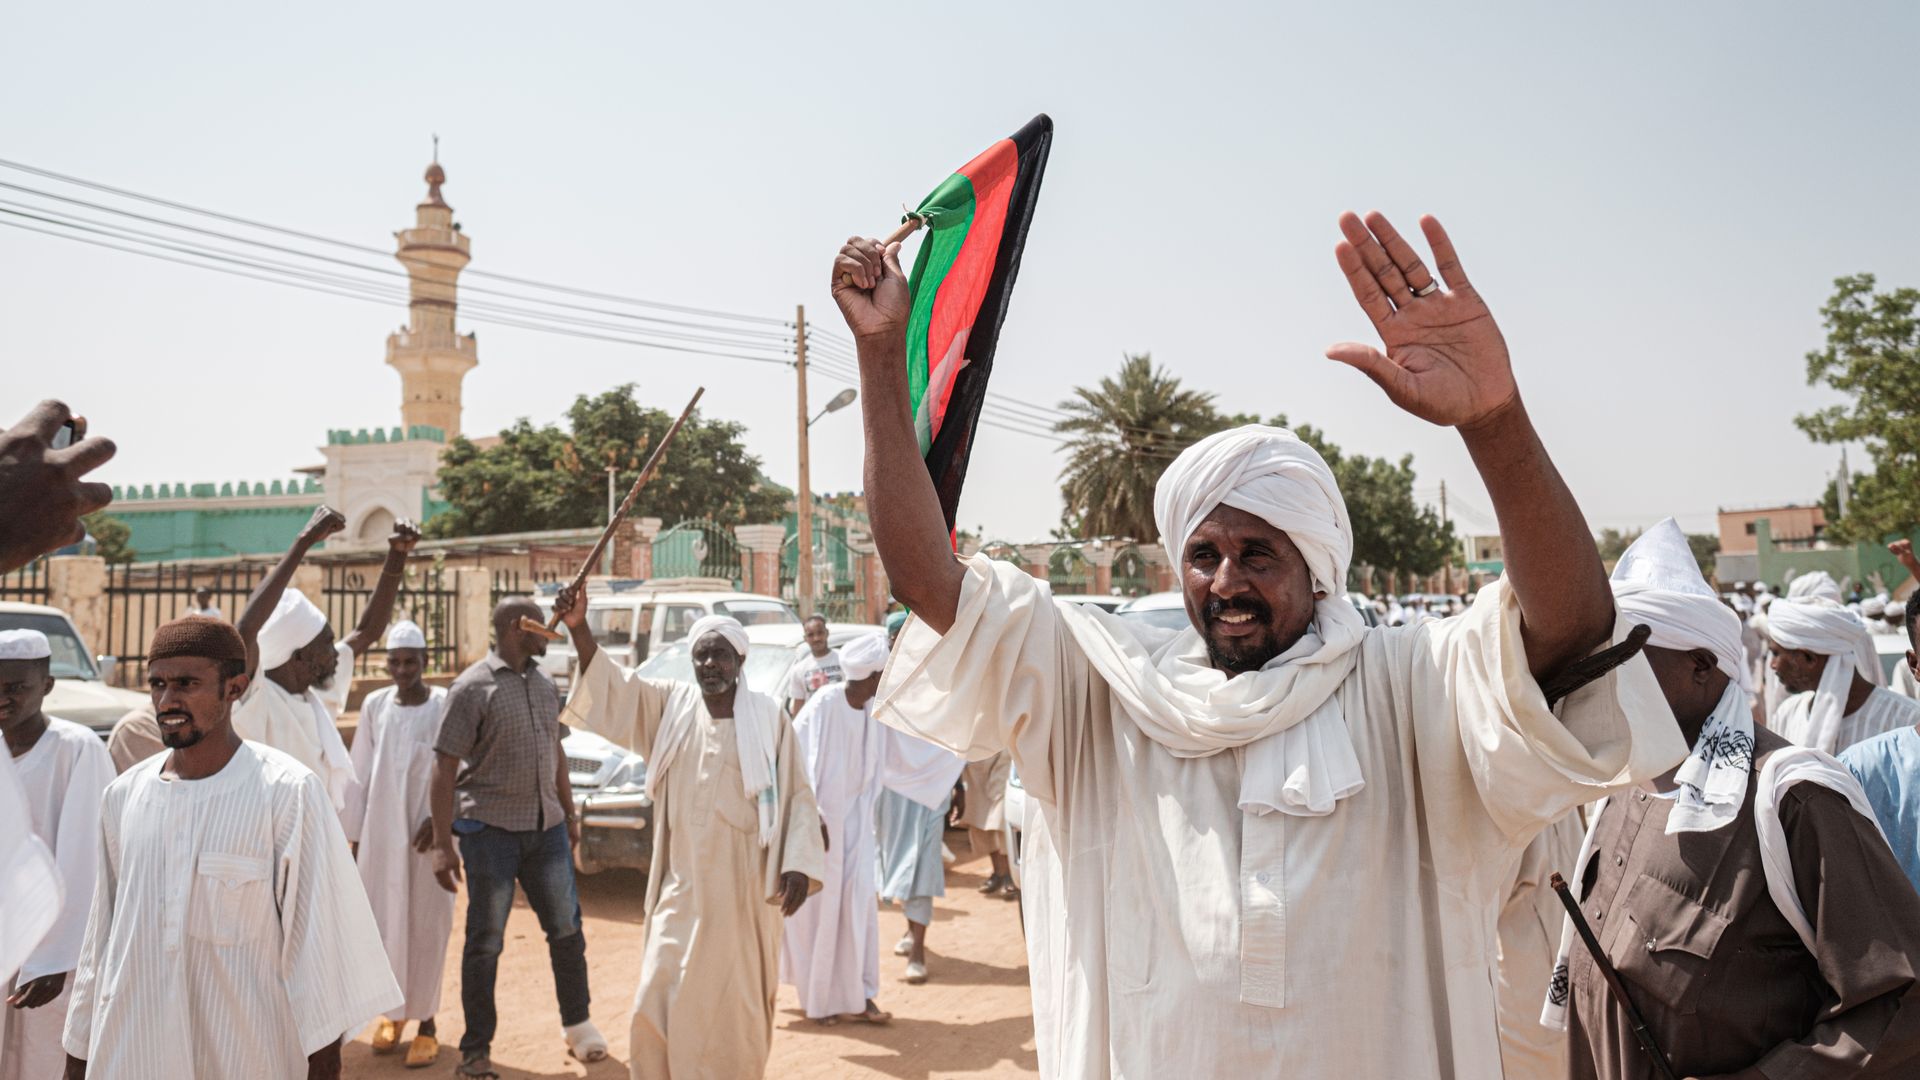 Sudanese citizens leaving a mosque after calls for an investigation into a protest that became violent